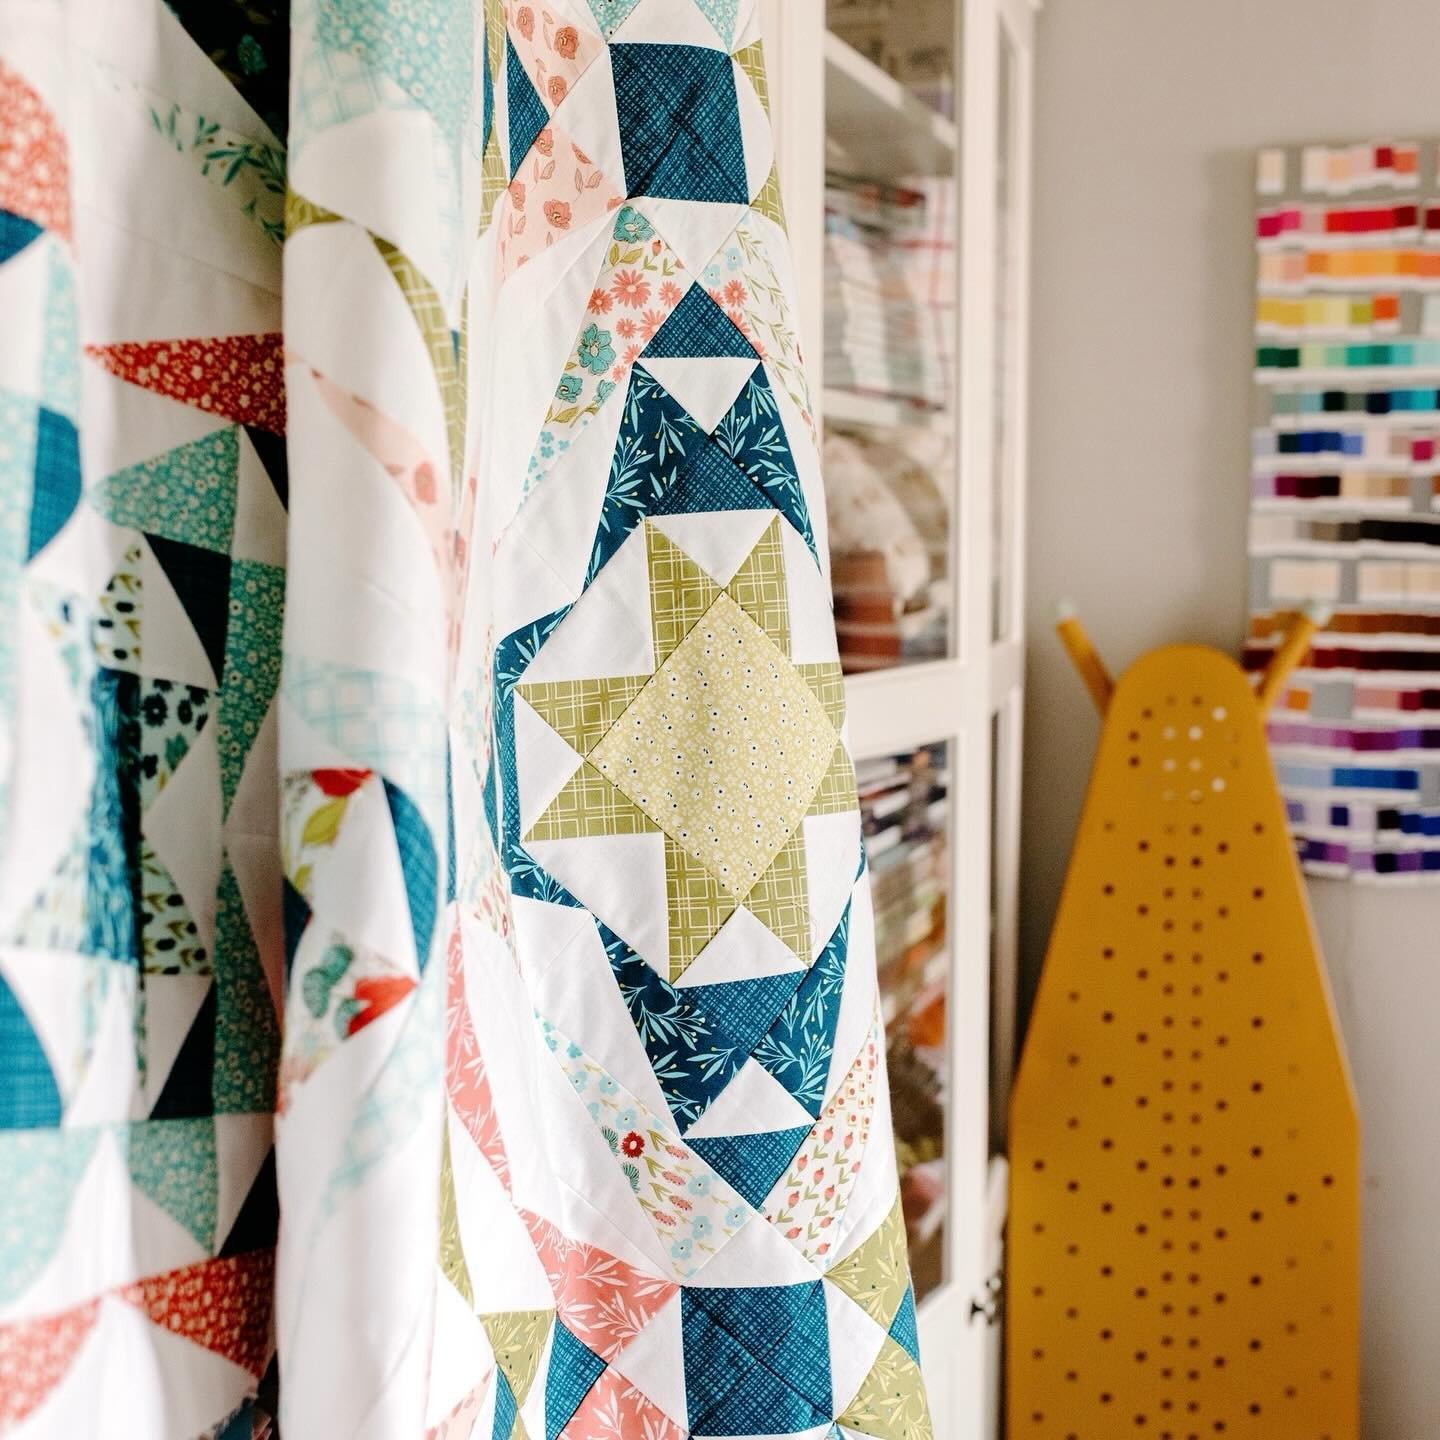 Introducing Sunkissed Stars! 🌟 I&rsquo;m absolutely in love with this pattern! 💖

Mixing and matching pattern pieces have always been a joy for me, and creating this quilt was no exception.

I even tackled half rectangle triangles for the first tim